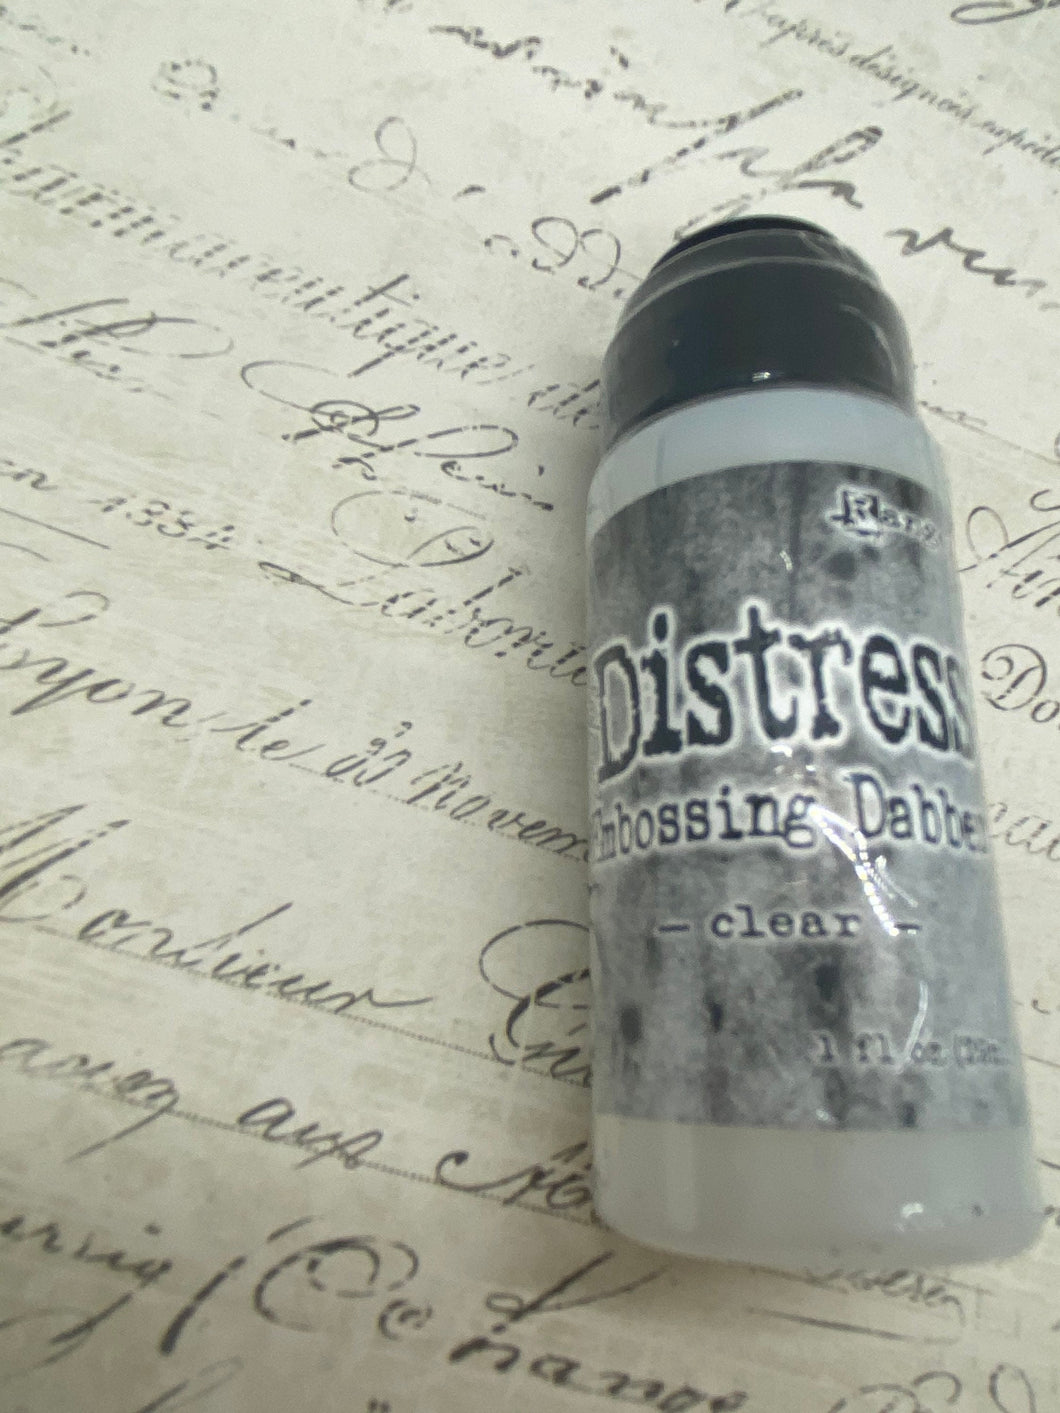 Tim Holtz Distress Embossing Dabber- clear